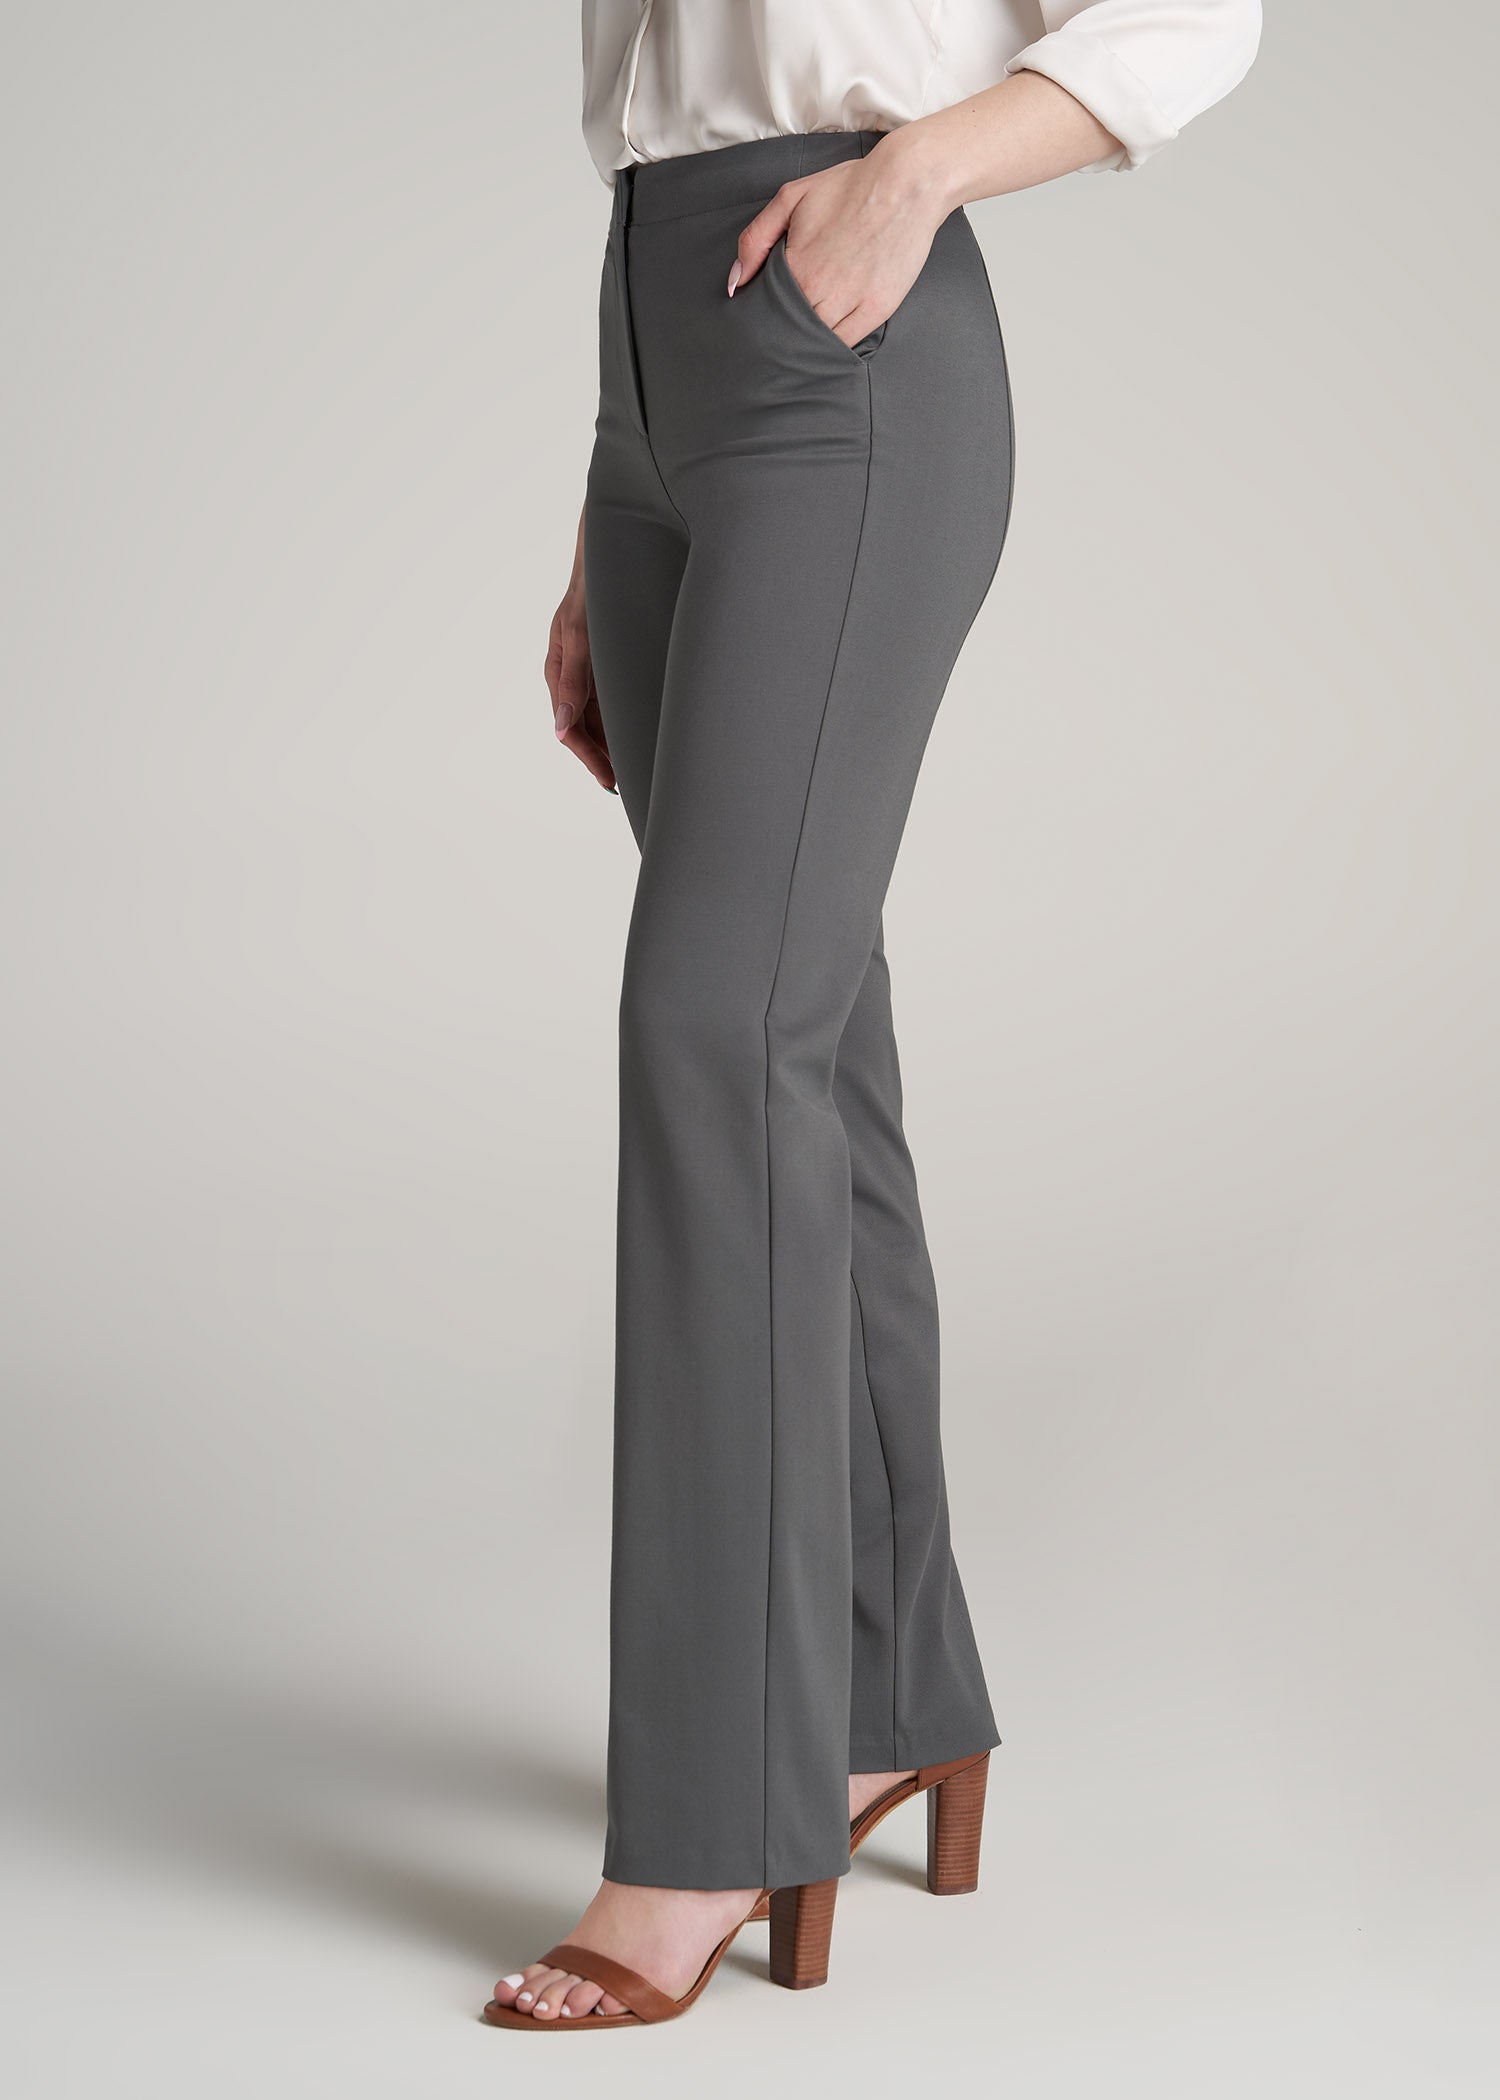 The Best Pull-On Pants for the Office - Corporette.com